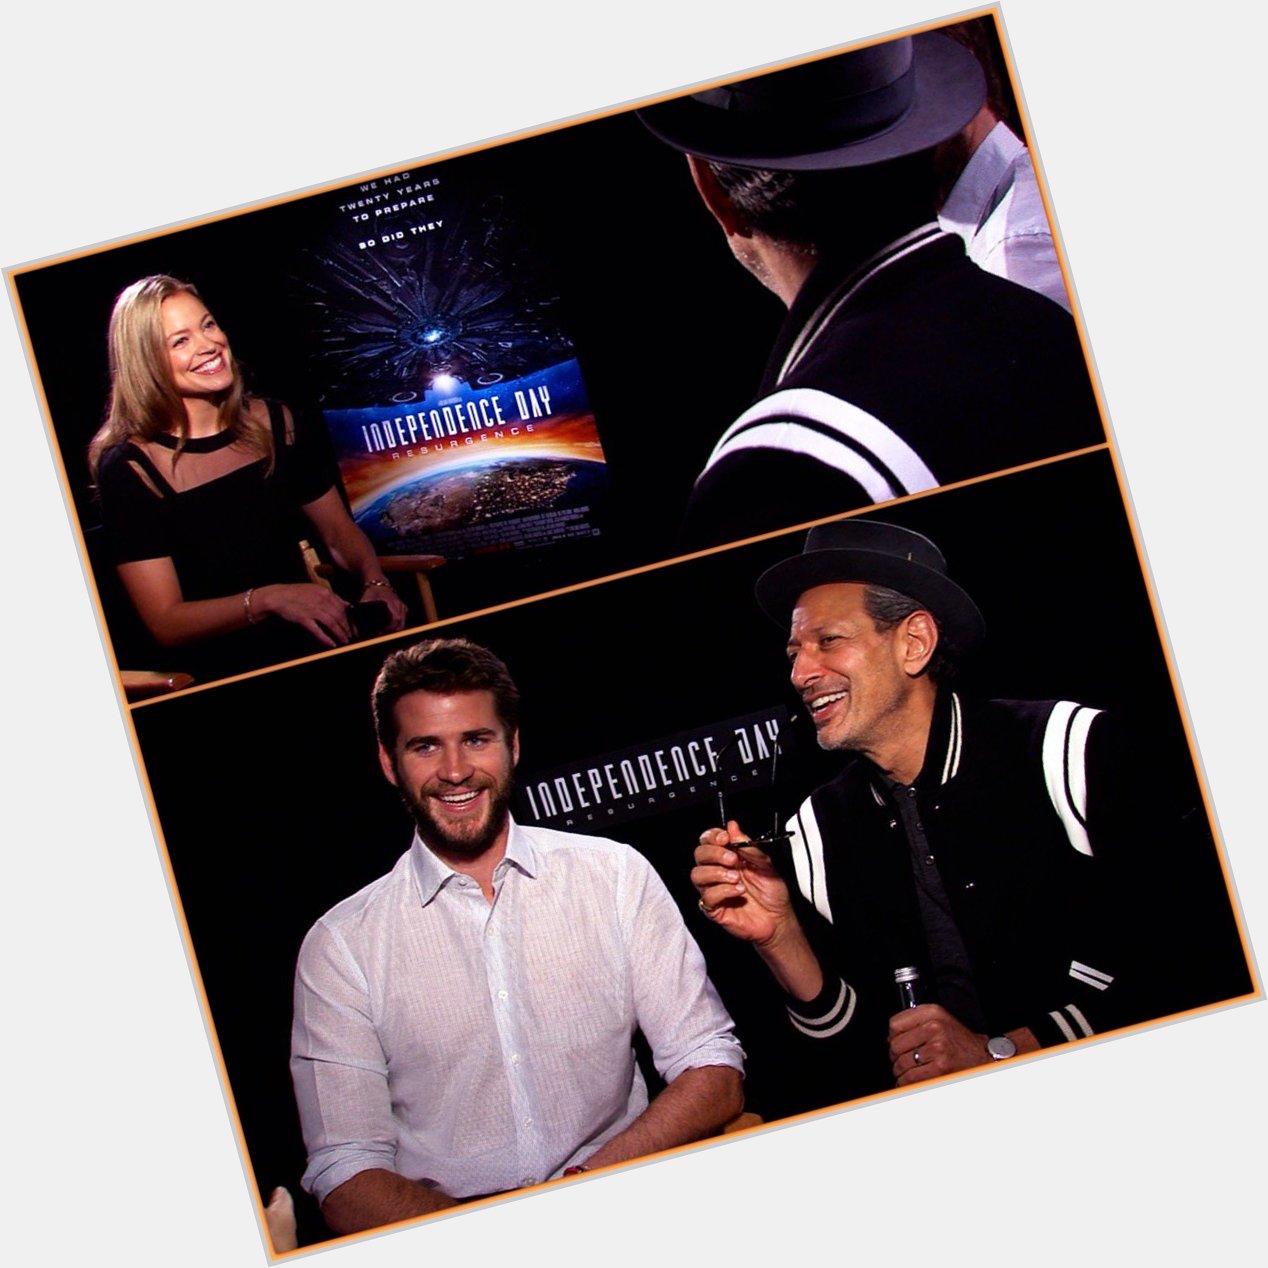 Happy Birthday Liam Hemsworth! Here\s an outtake from our Summer \16 interview:

 